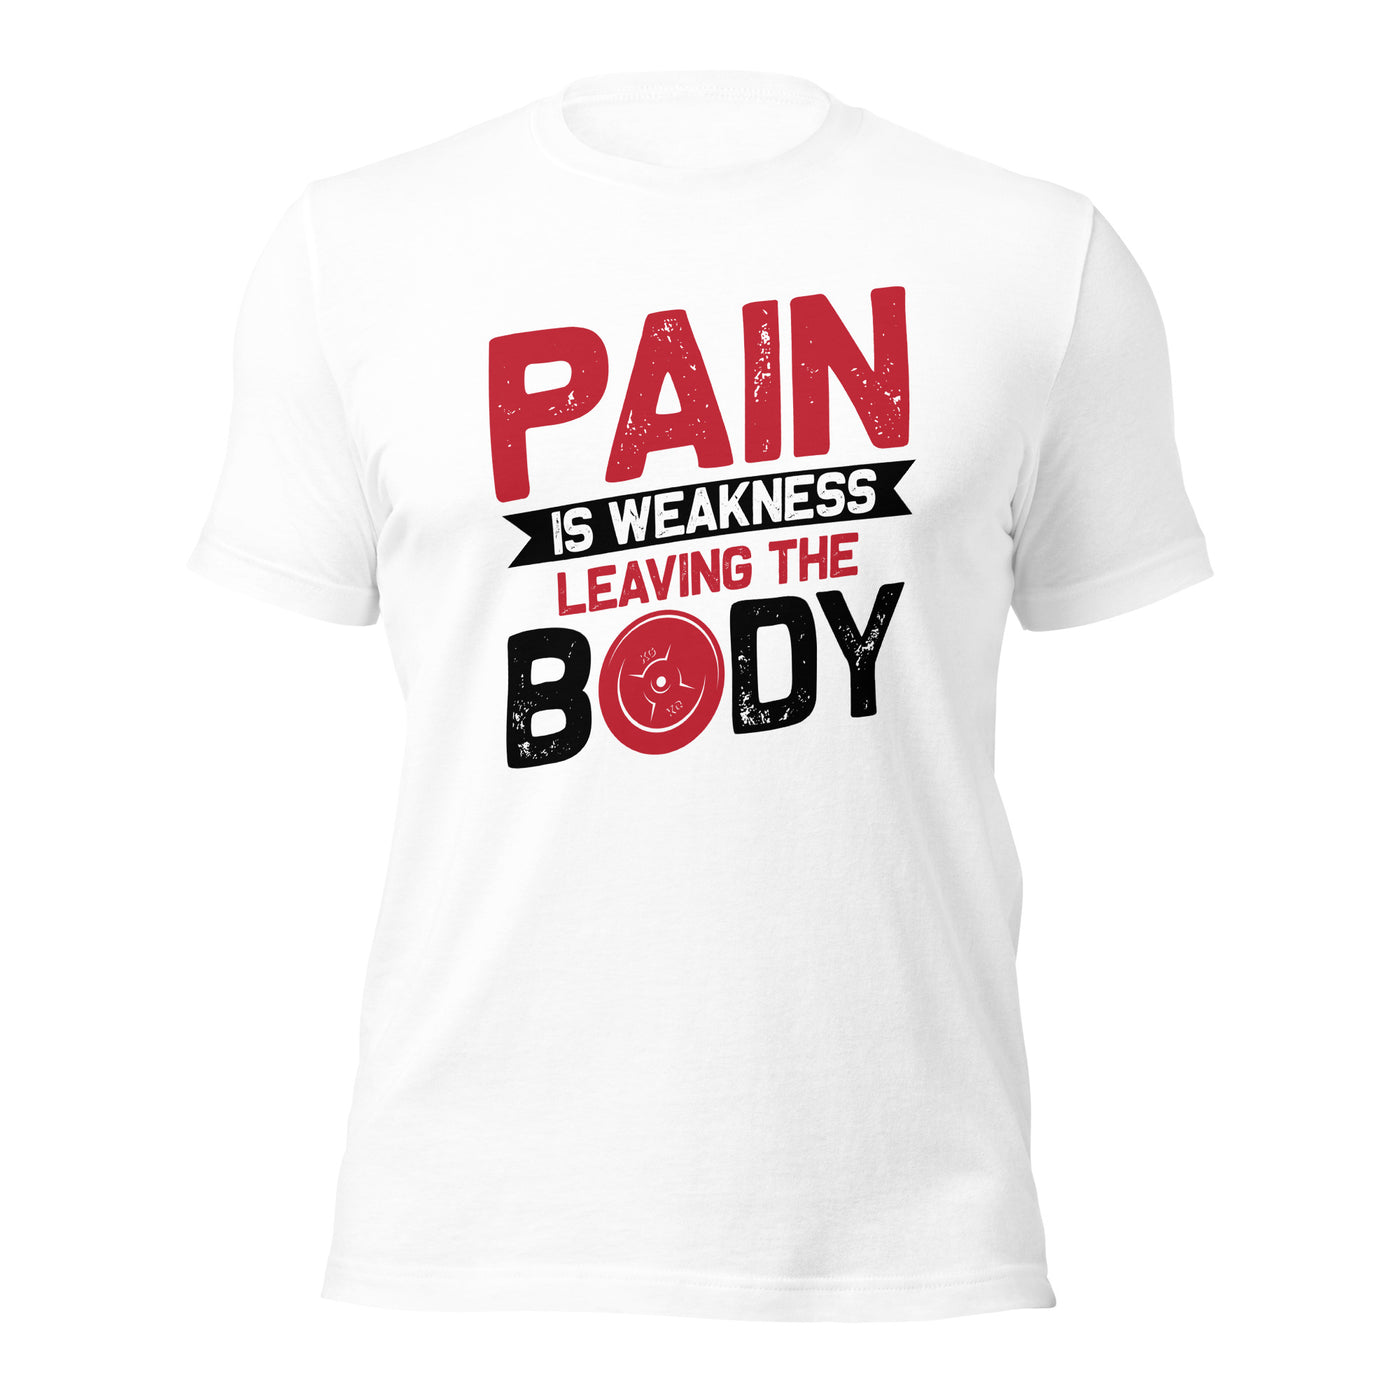 Pain is Weakness Leaving the Body - Unisex t-shirt